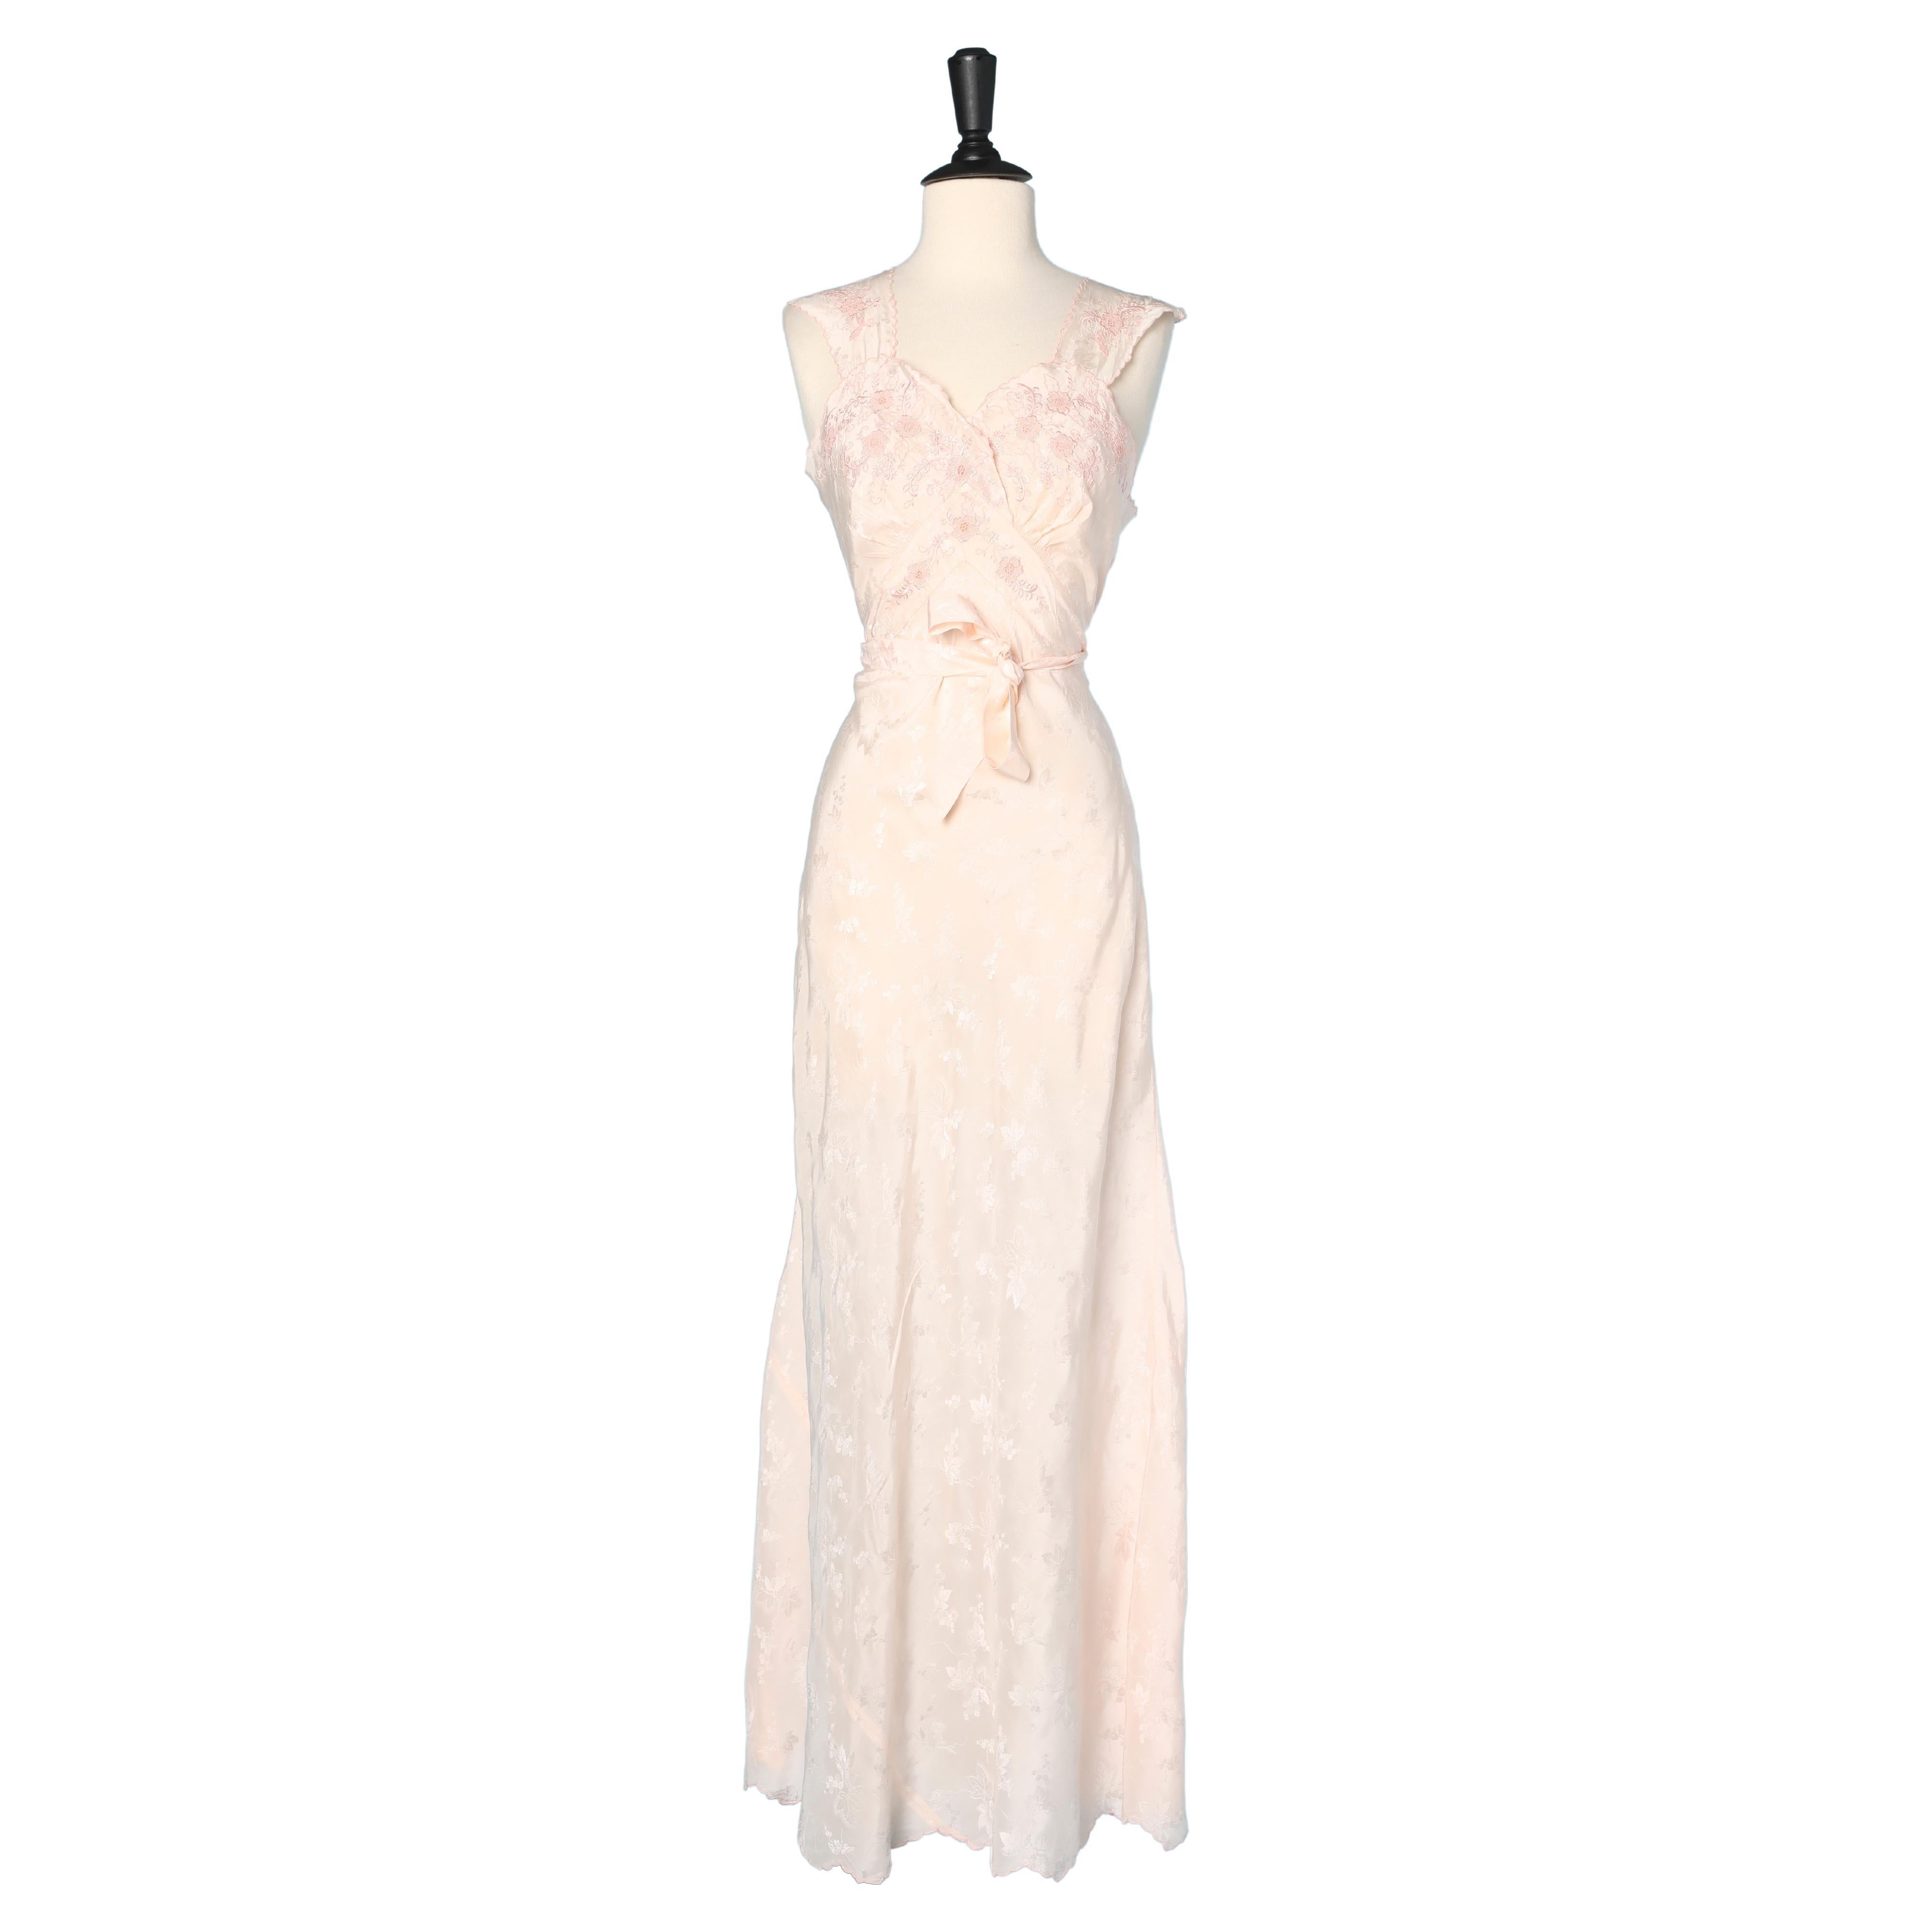 1930's pale silk jacquard nightgown with grape bunches jacquard pattern 